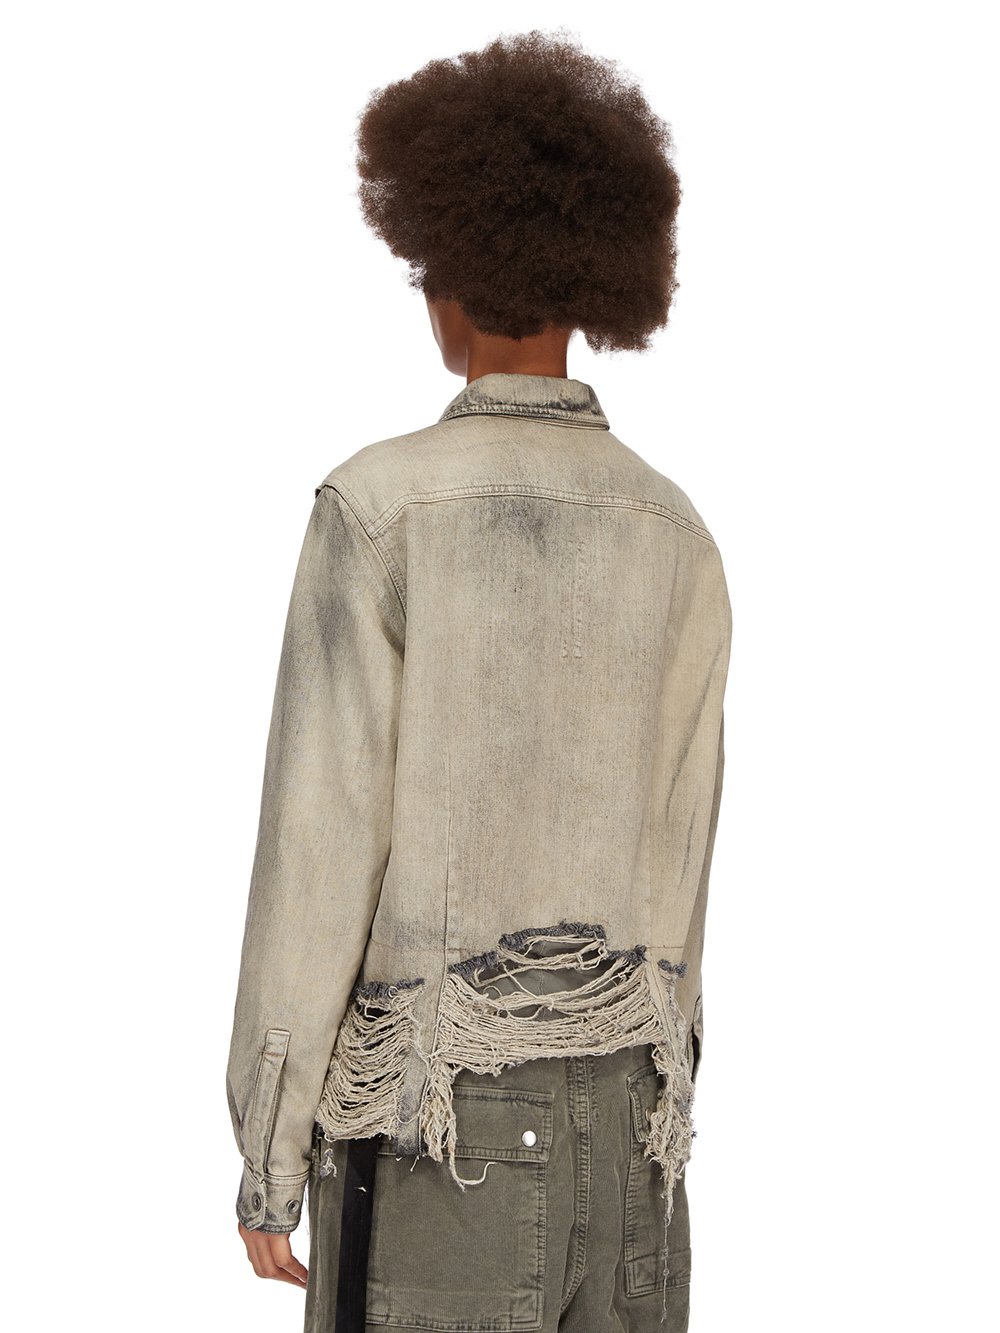 DRKSHDW FW23 LUXOR CAPE SLEEVE CROPPED OUTERSHIRT IN 13OZ MINERAL PEARL DENIM